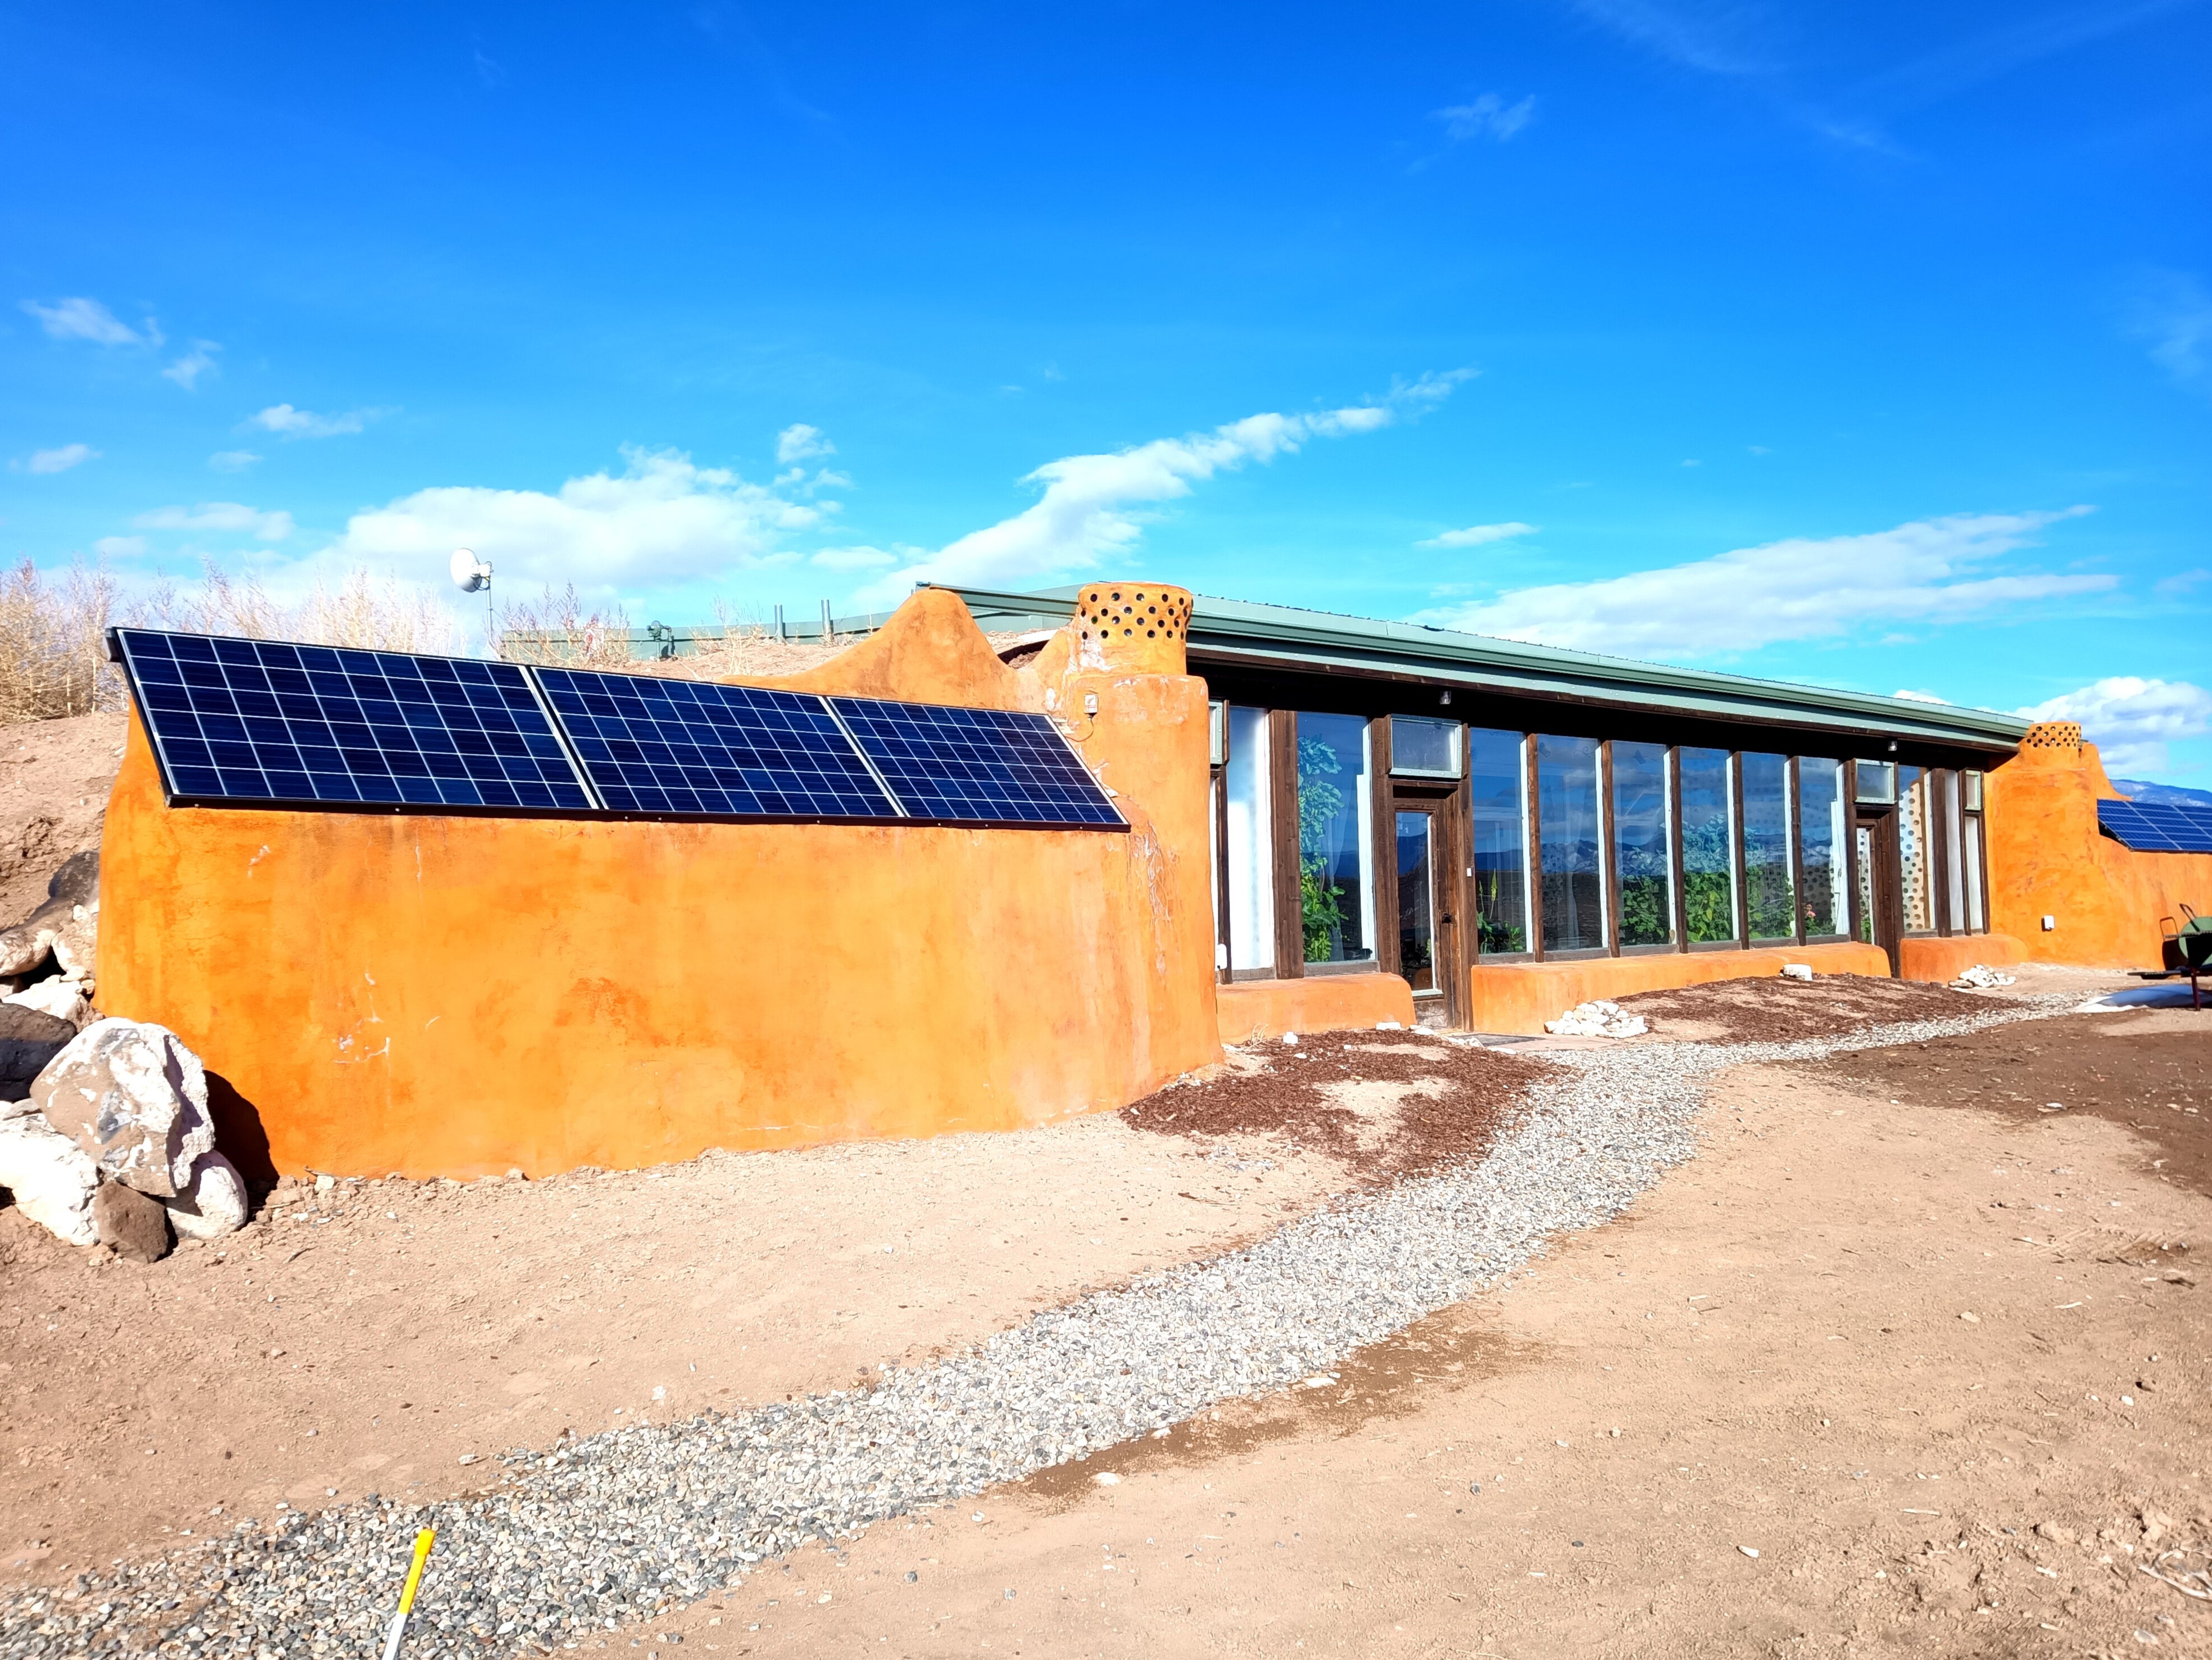 The Earthship visitor centre